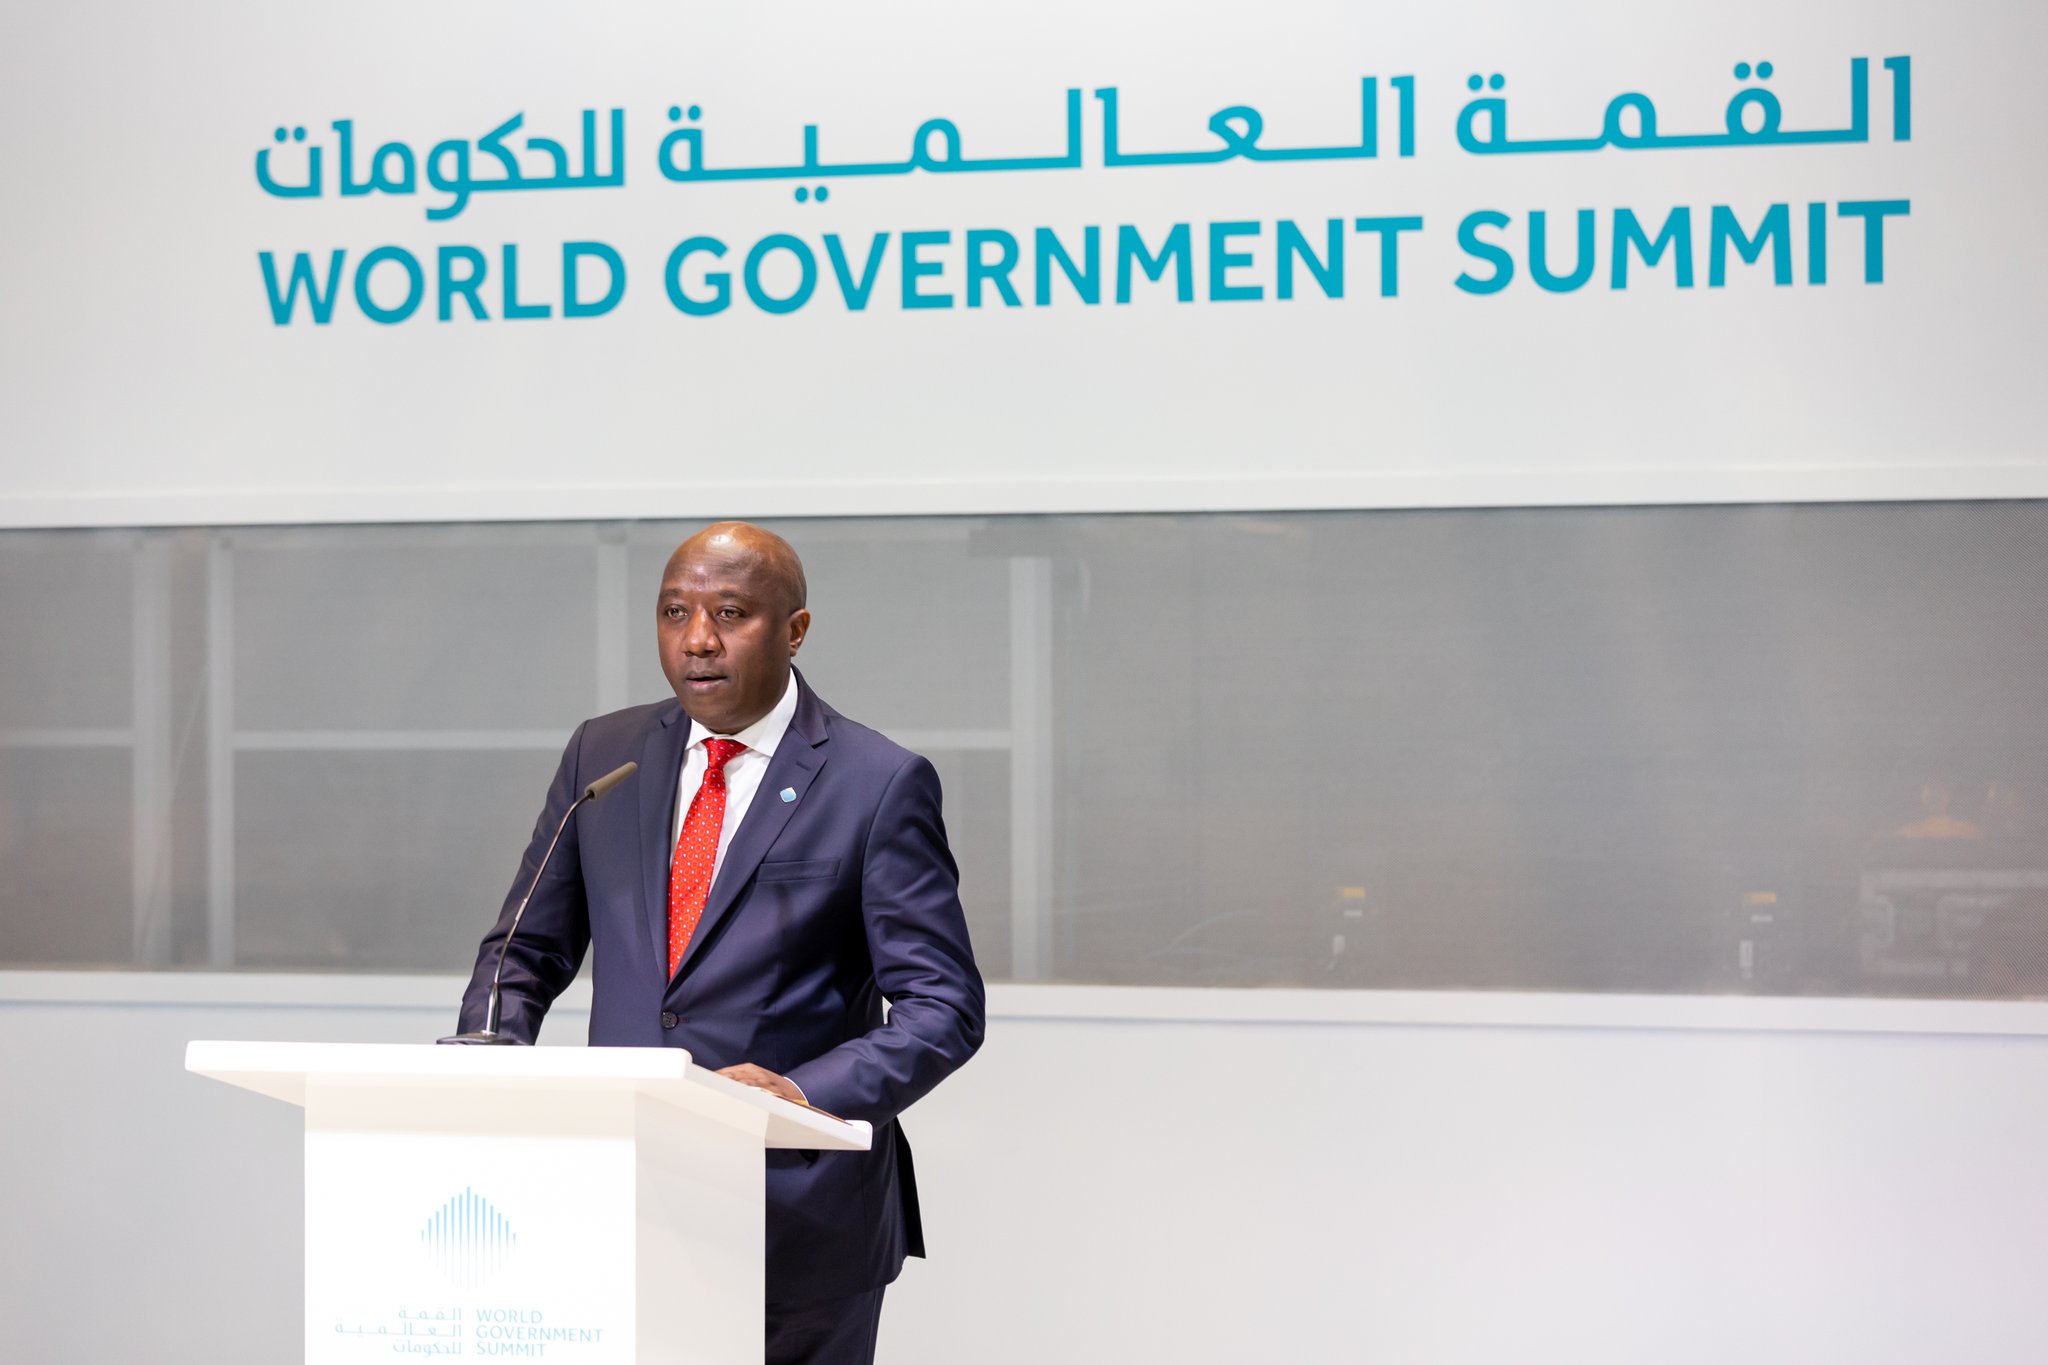 Prime Minister Edouard Ngirente speaks at the 8th Edition of the World Government Summit in Dubai on Wednesday, March 30. / Photo: Courtesy.